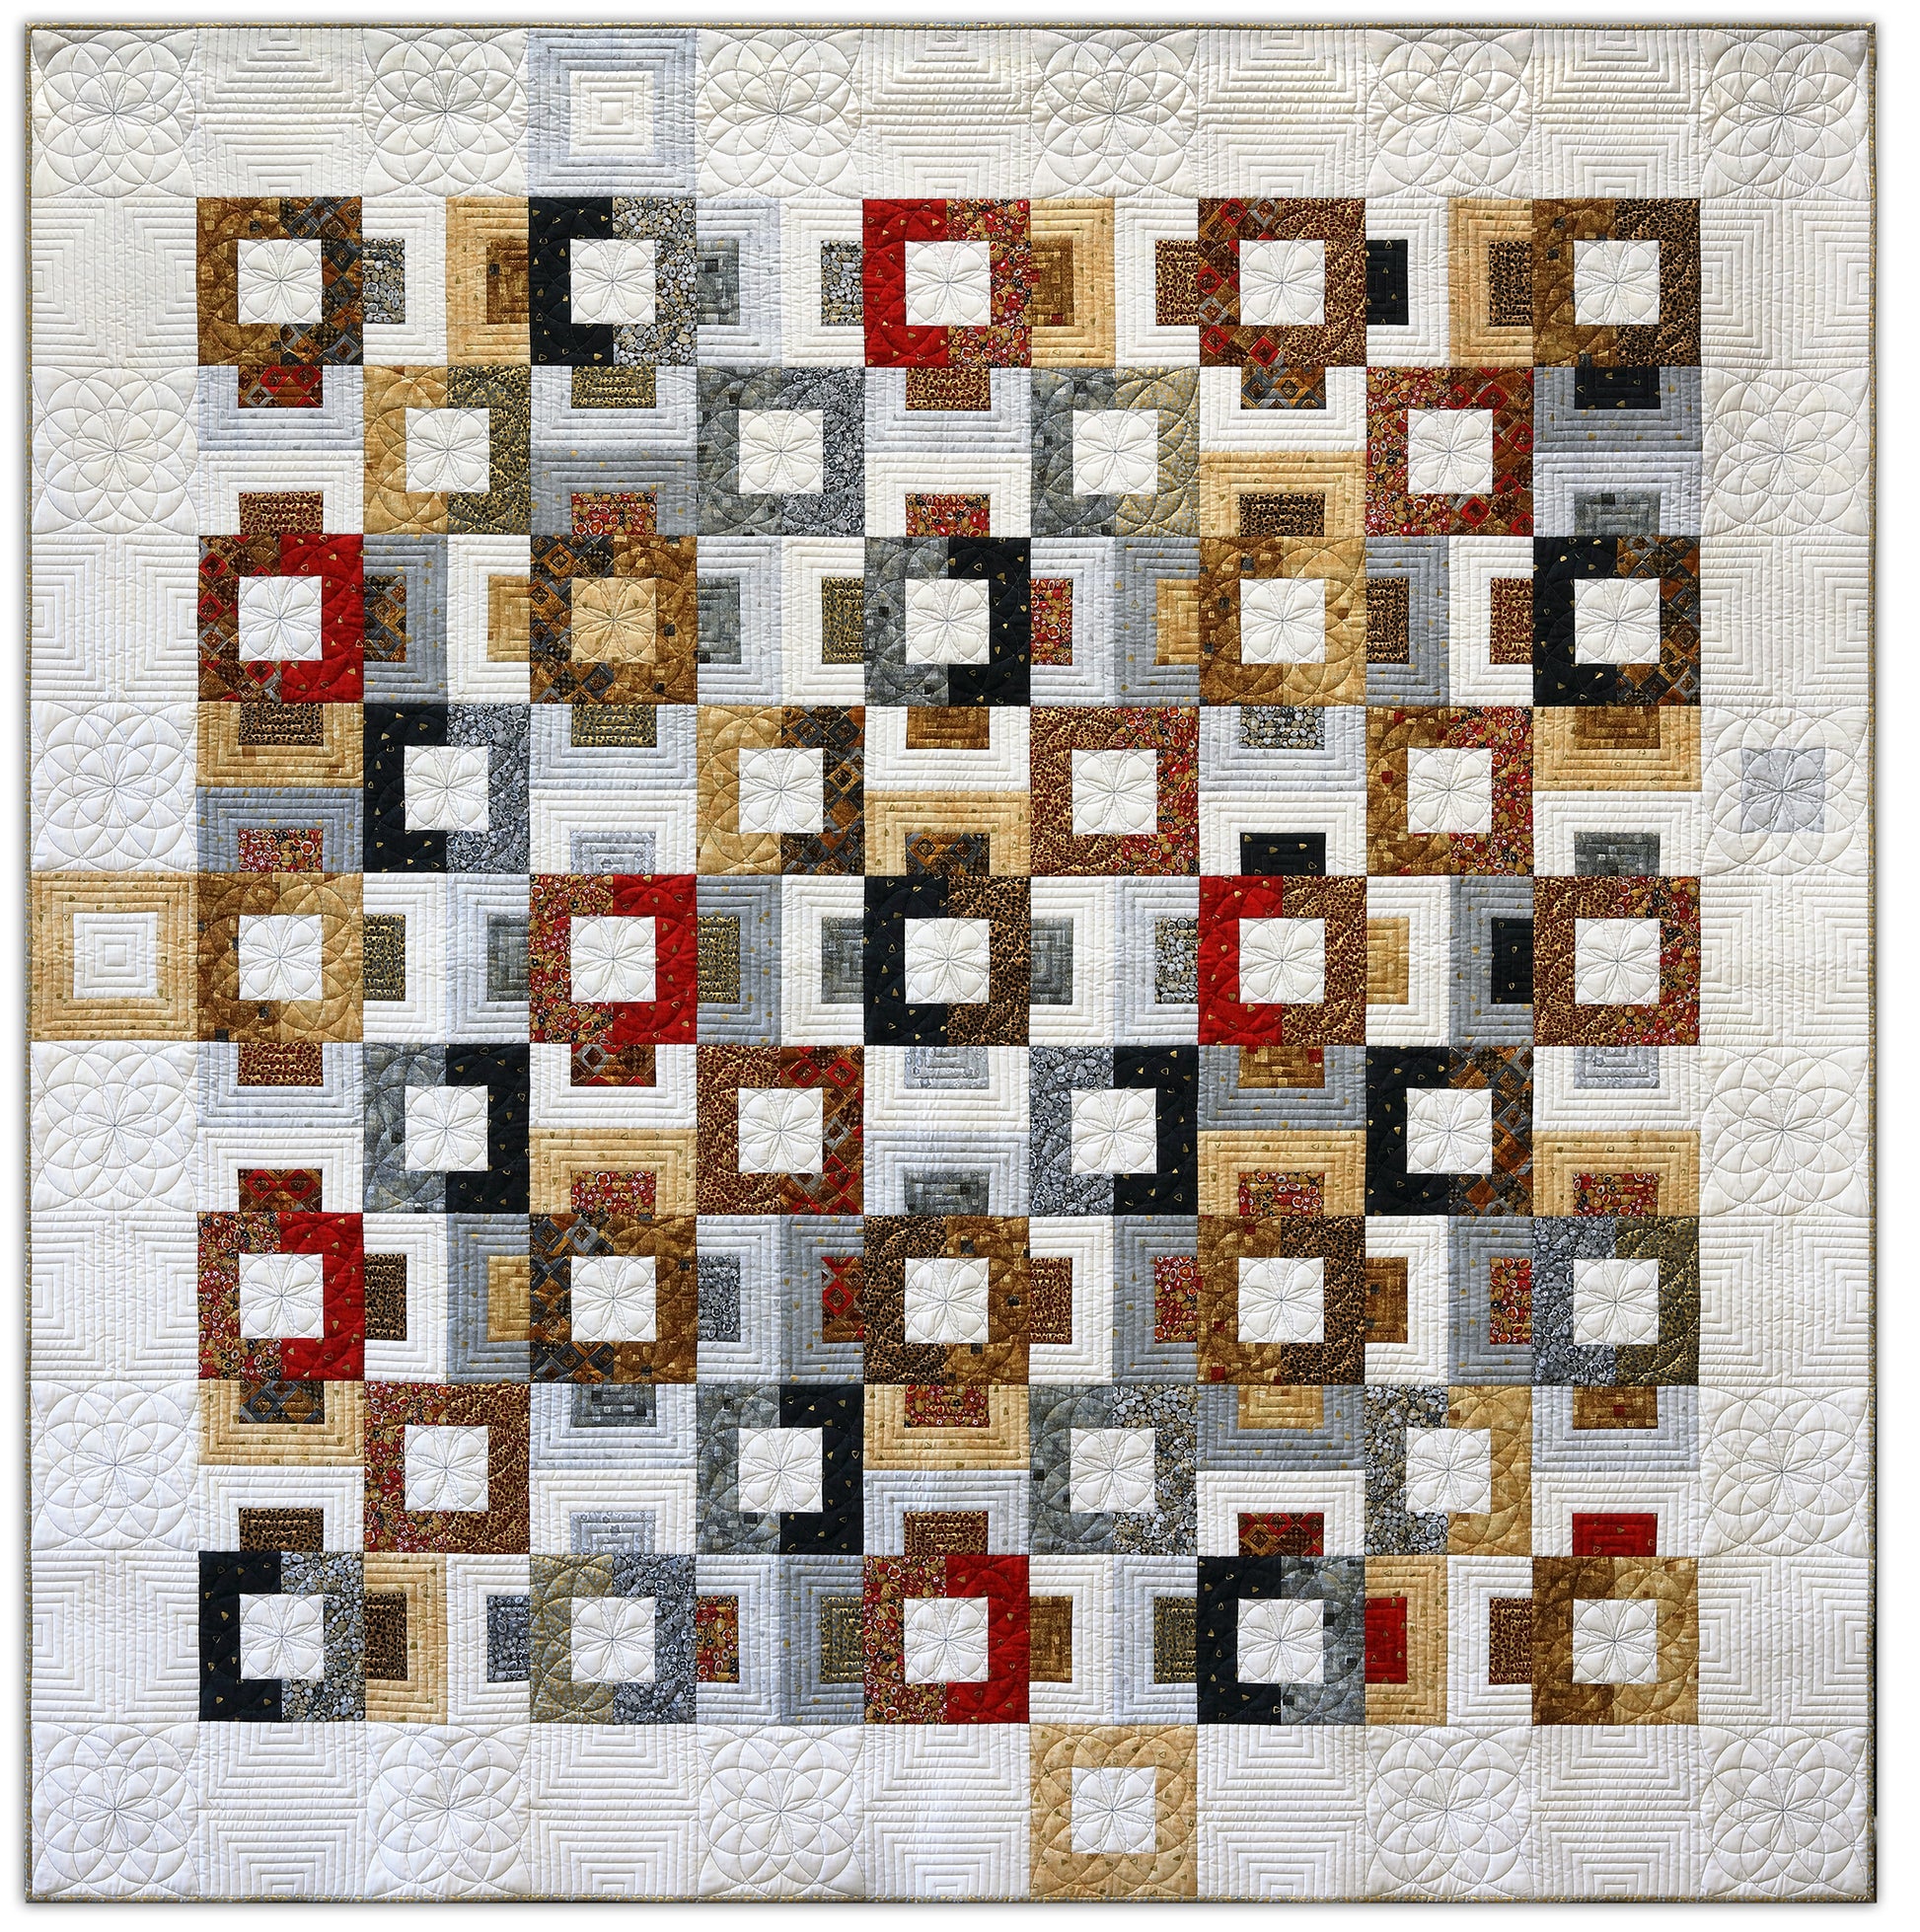 ART QUILT TITLED: Block Party CREATED by Karen Hampton, SIZE: 87” x 87” Made from an existing pattern named Blockstep, Pieced, and Machine quilted. Inspired by Gustav Klint fabric. 